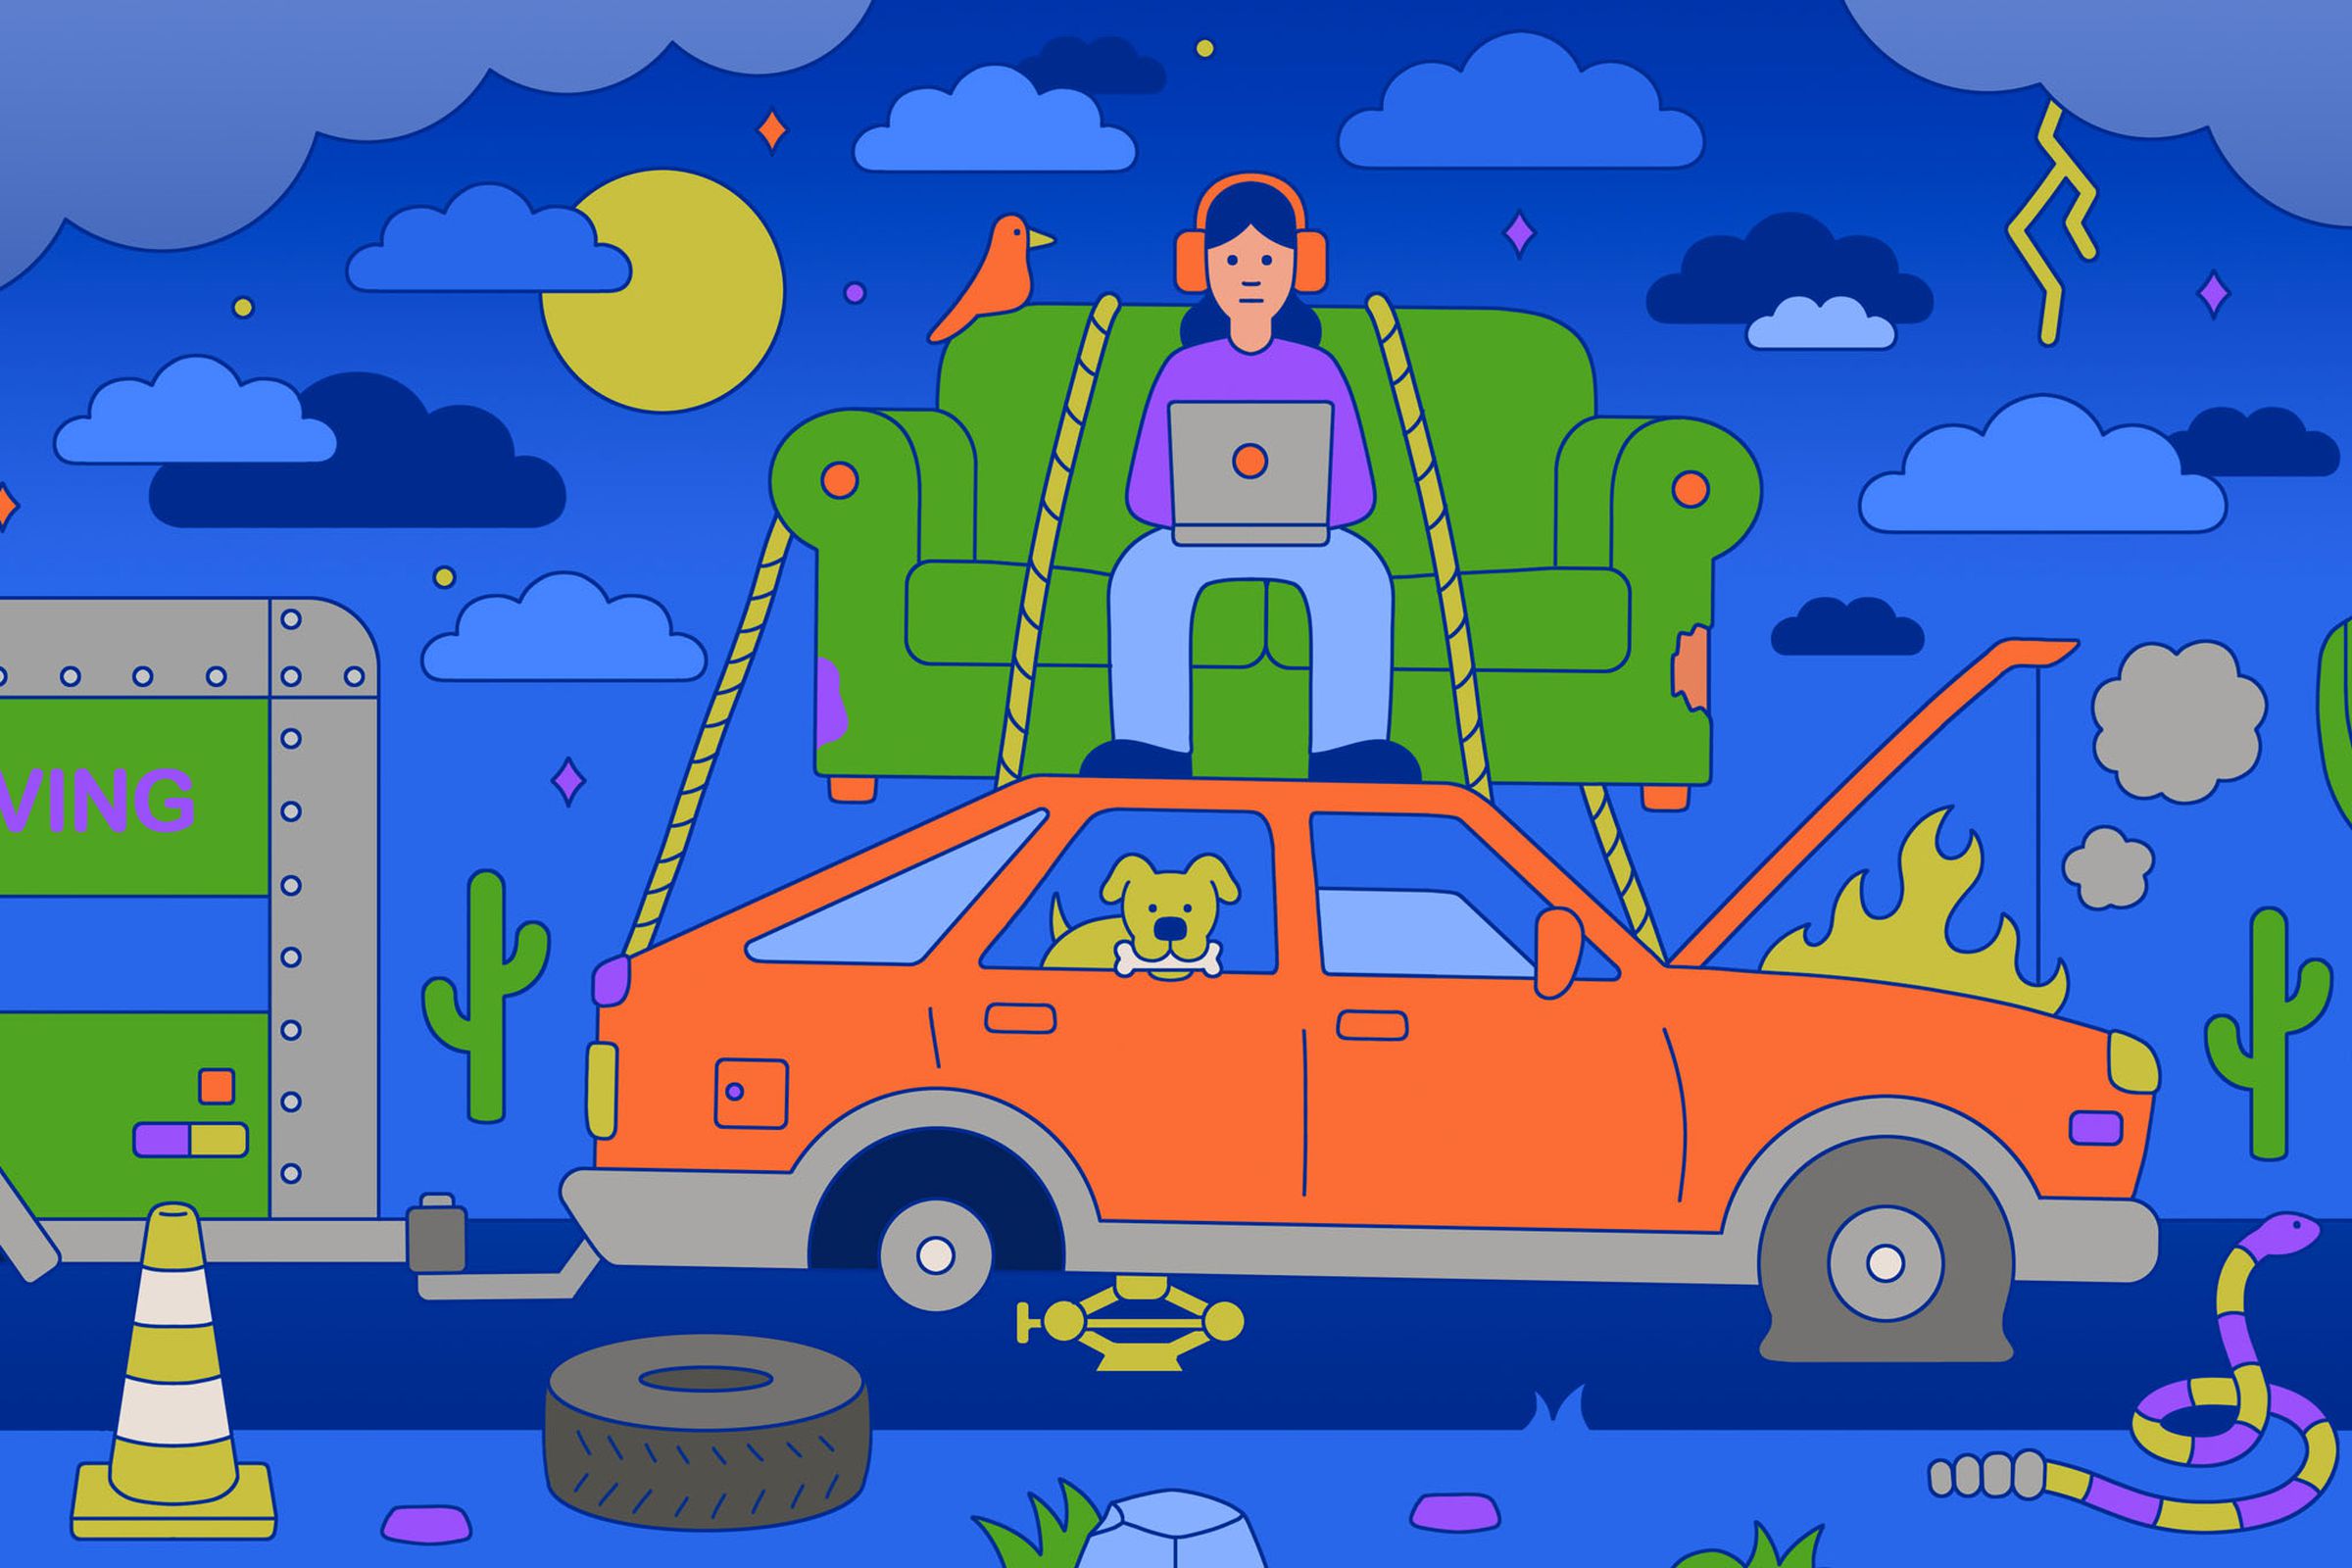 Illustration of a person remote working from on top of their couch that is strapped to a car broken down in the desert.